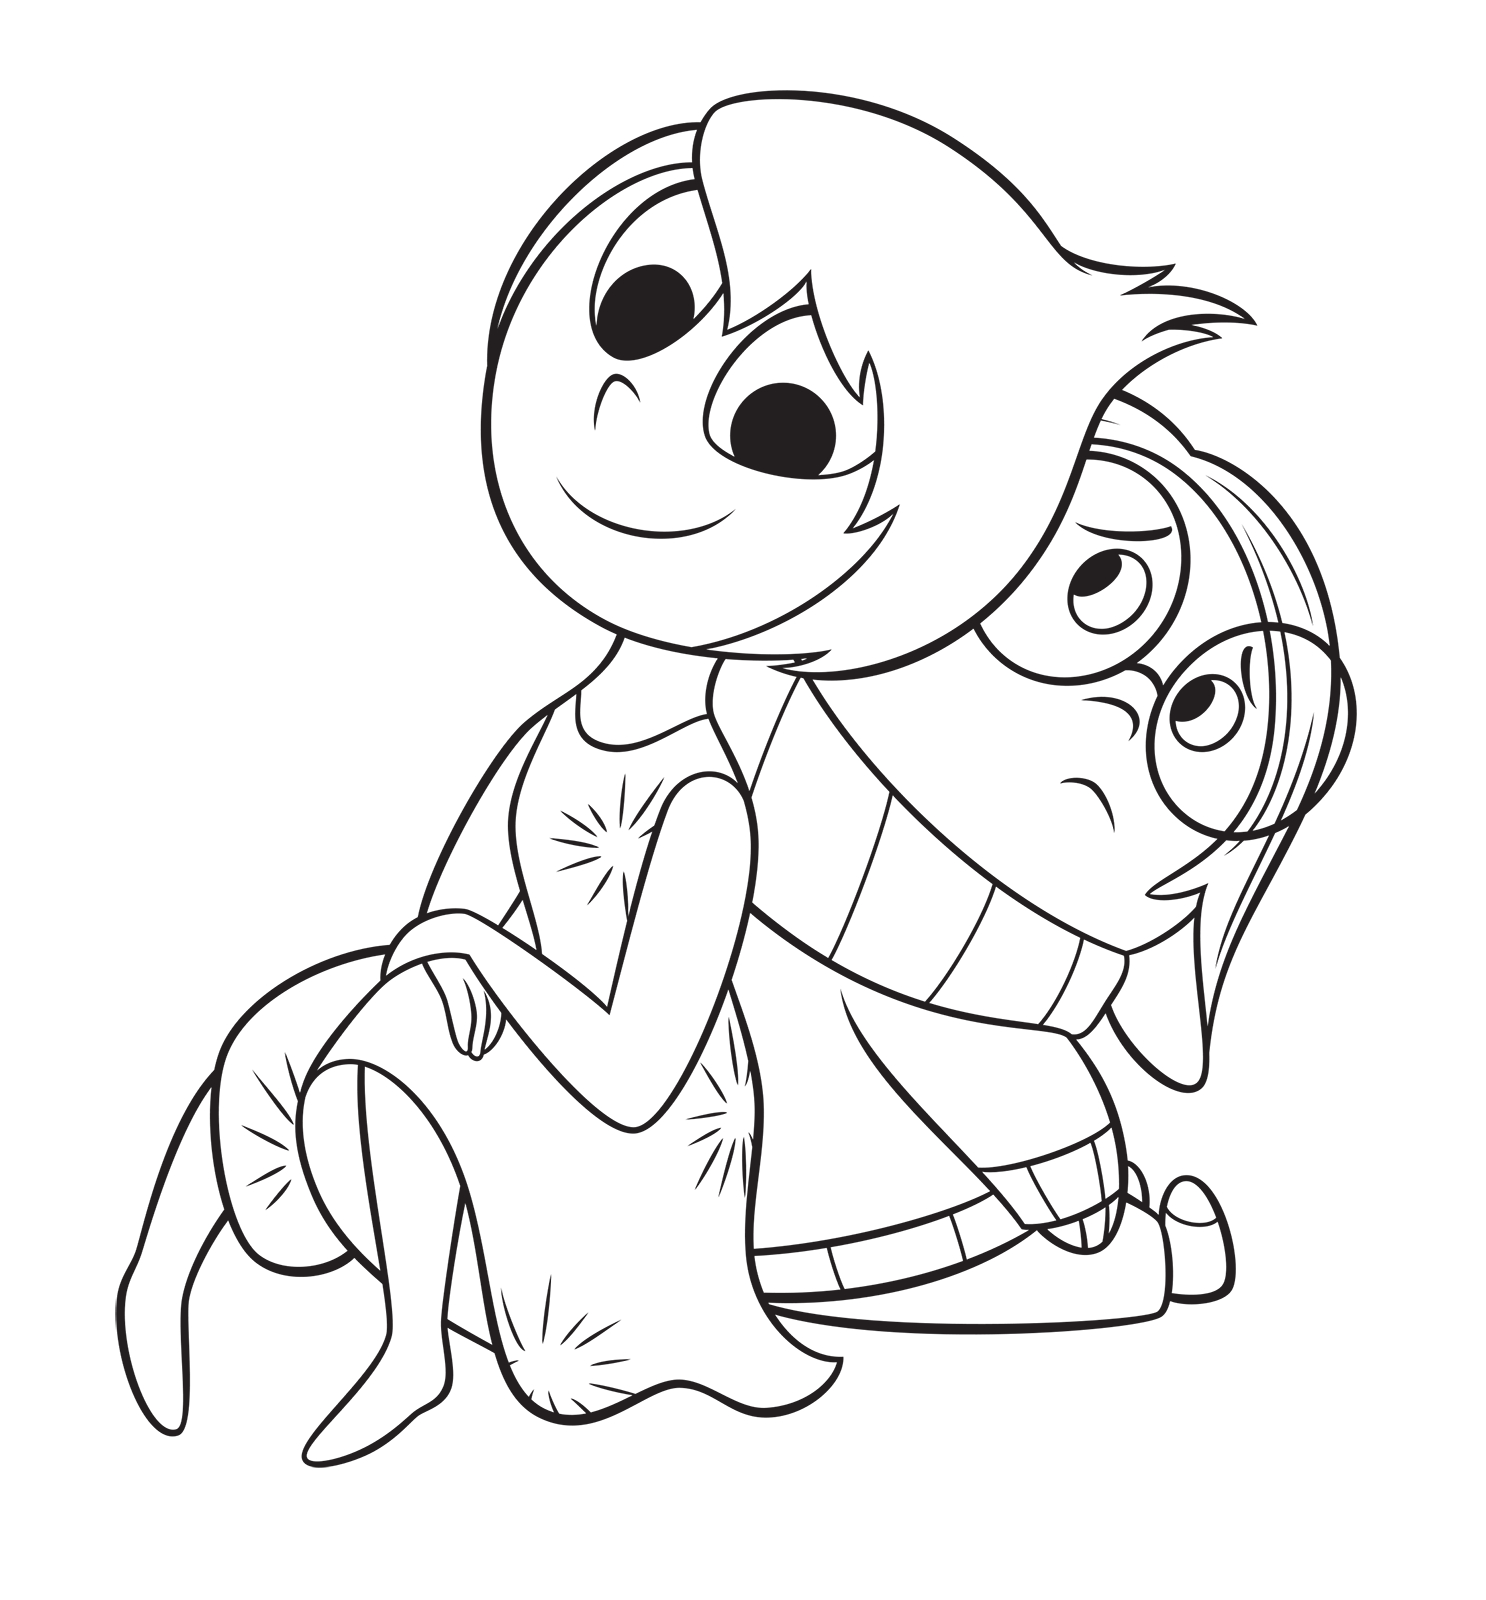 Inside Out Sadness Coloring Page Inside Out Joy Relies On The Backs Of Sadness